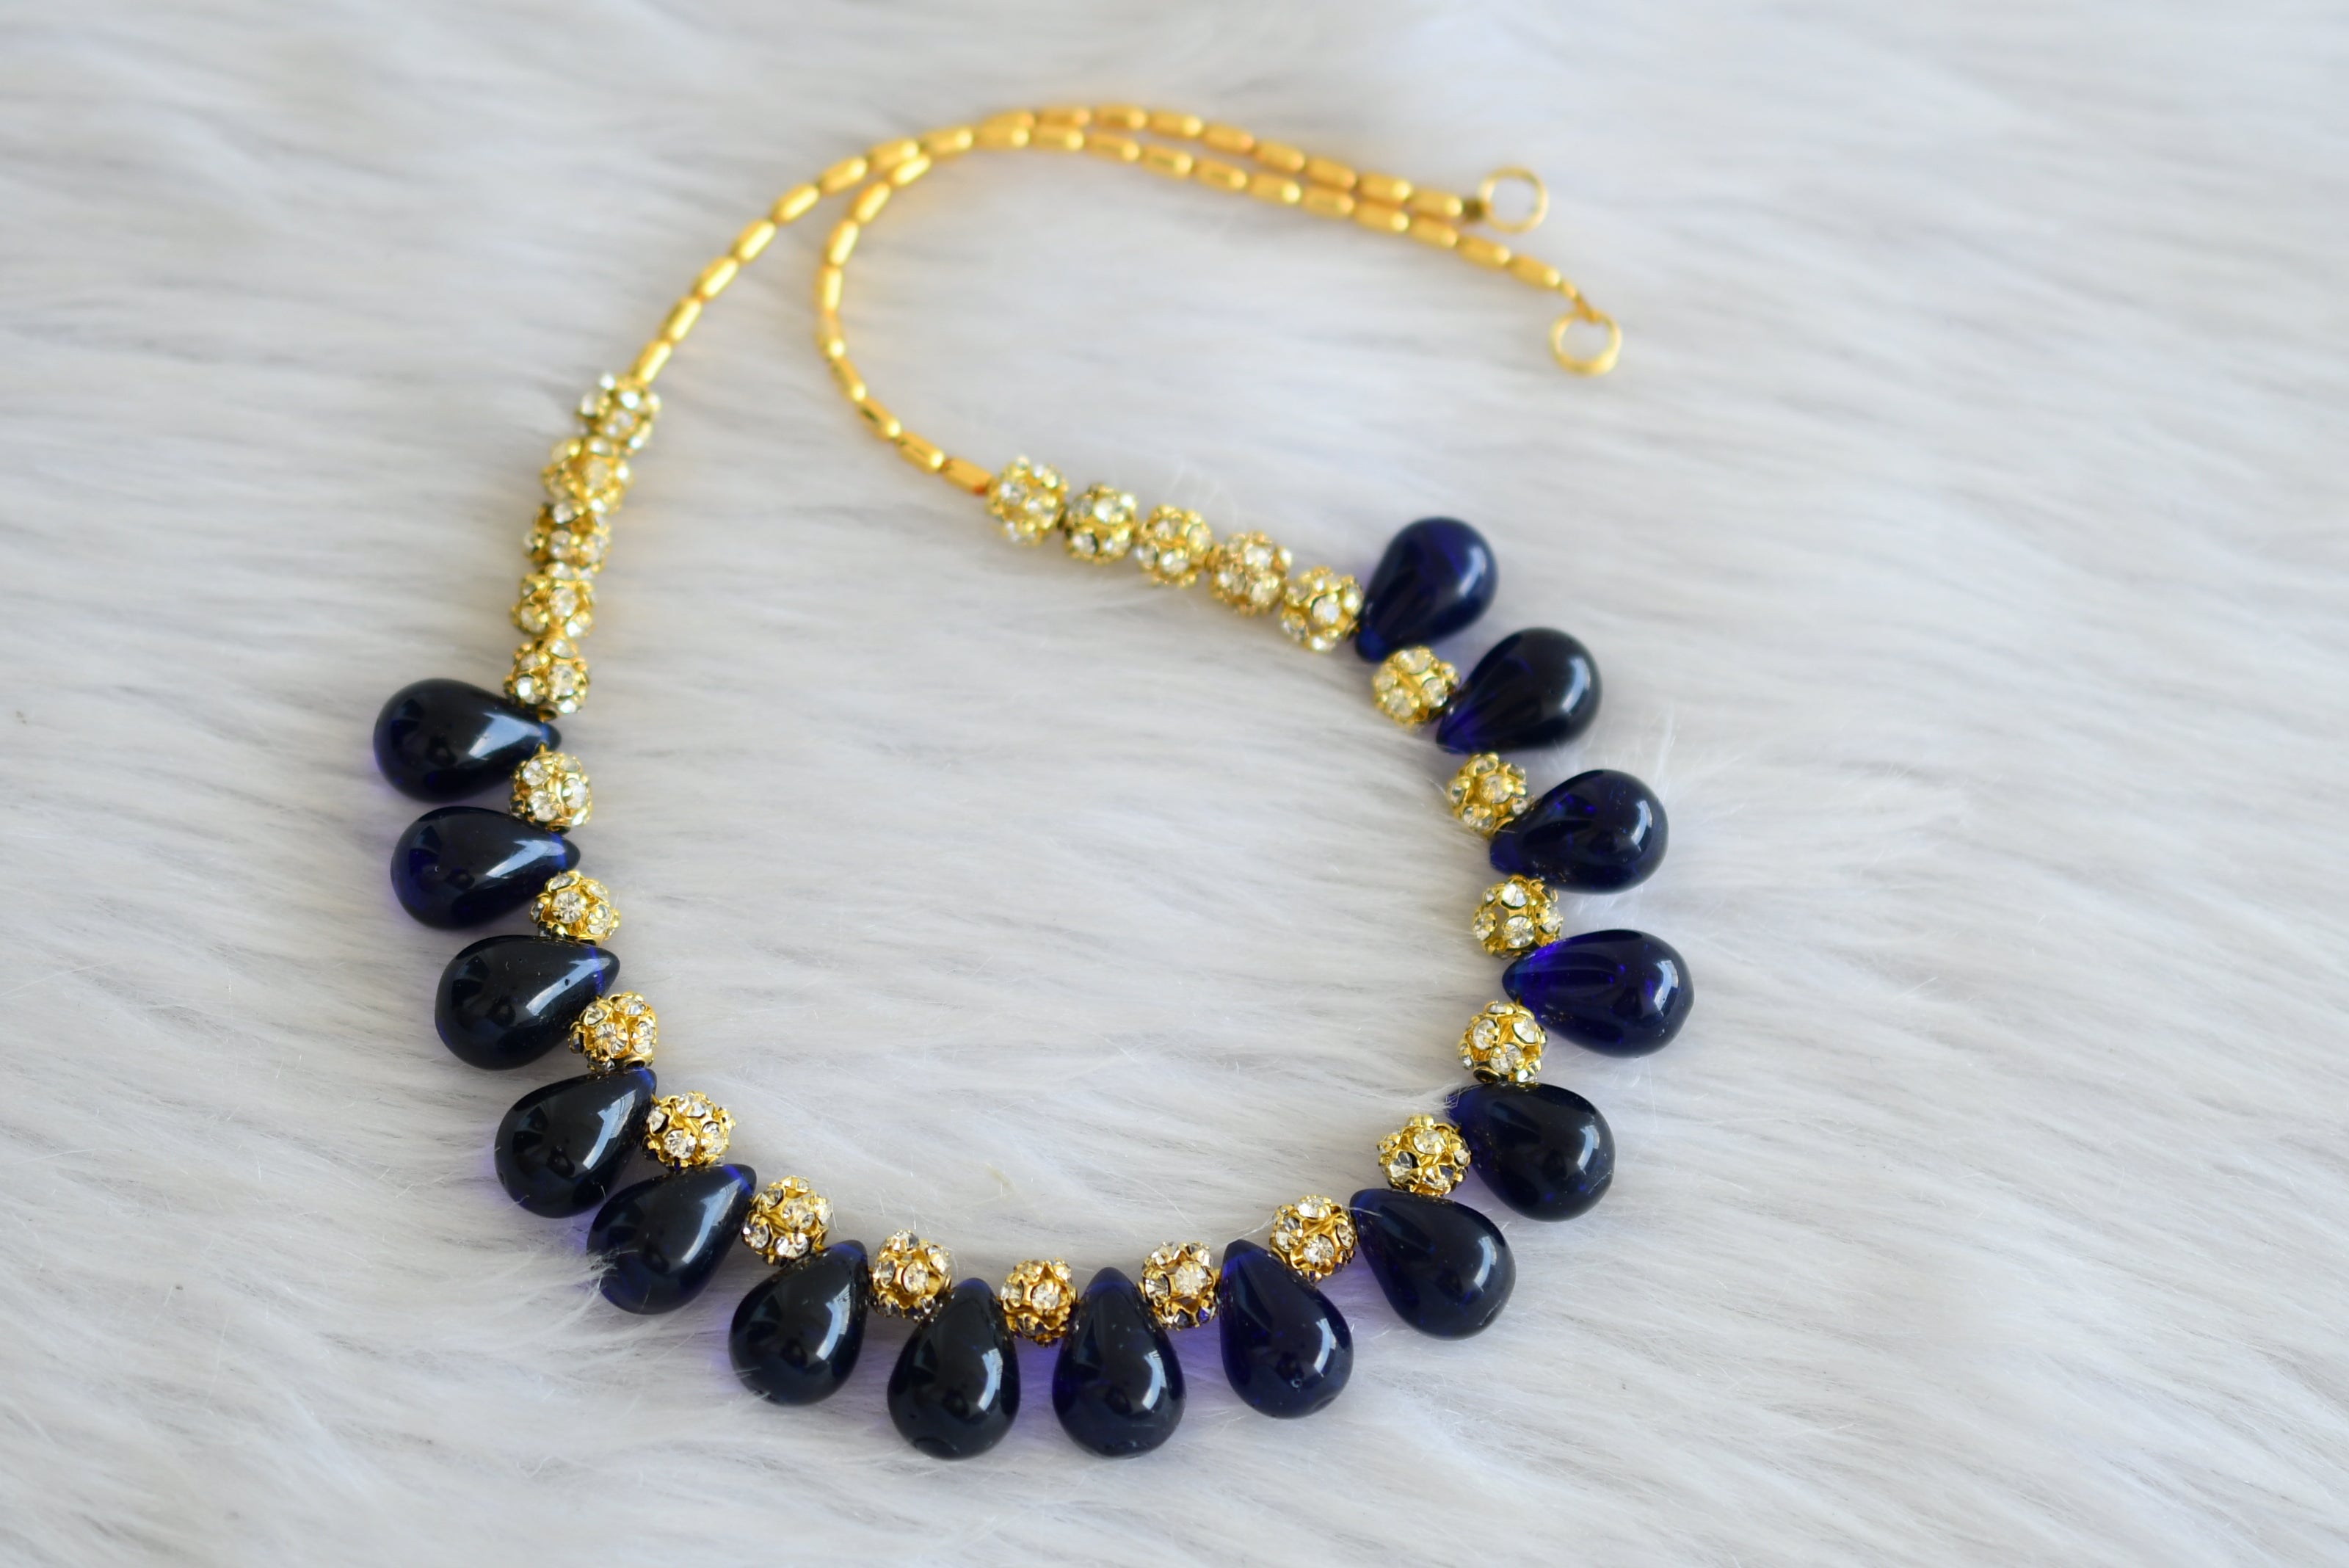 Buy YD Designs Adorable Navy Blue,Golden Chain & Sead Bead Necklace  (Style2) at Amazon.in